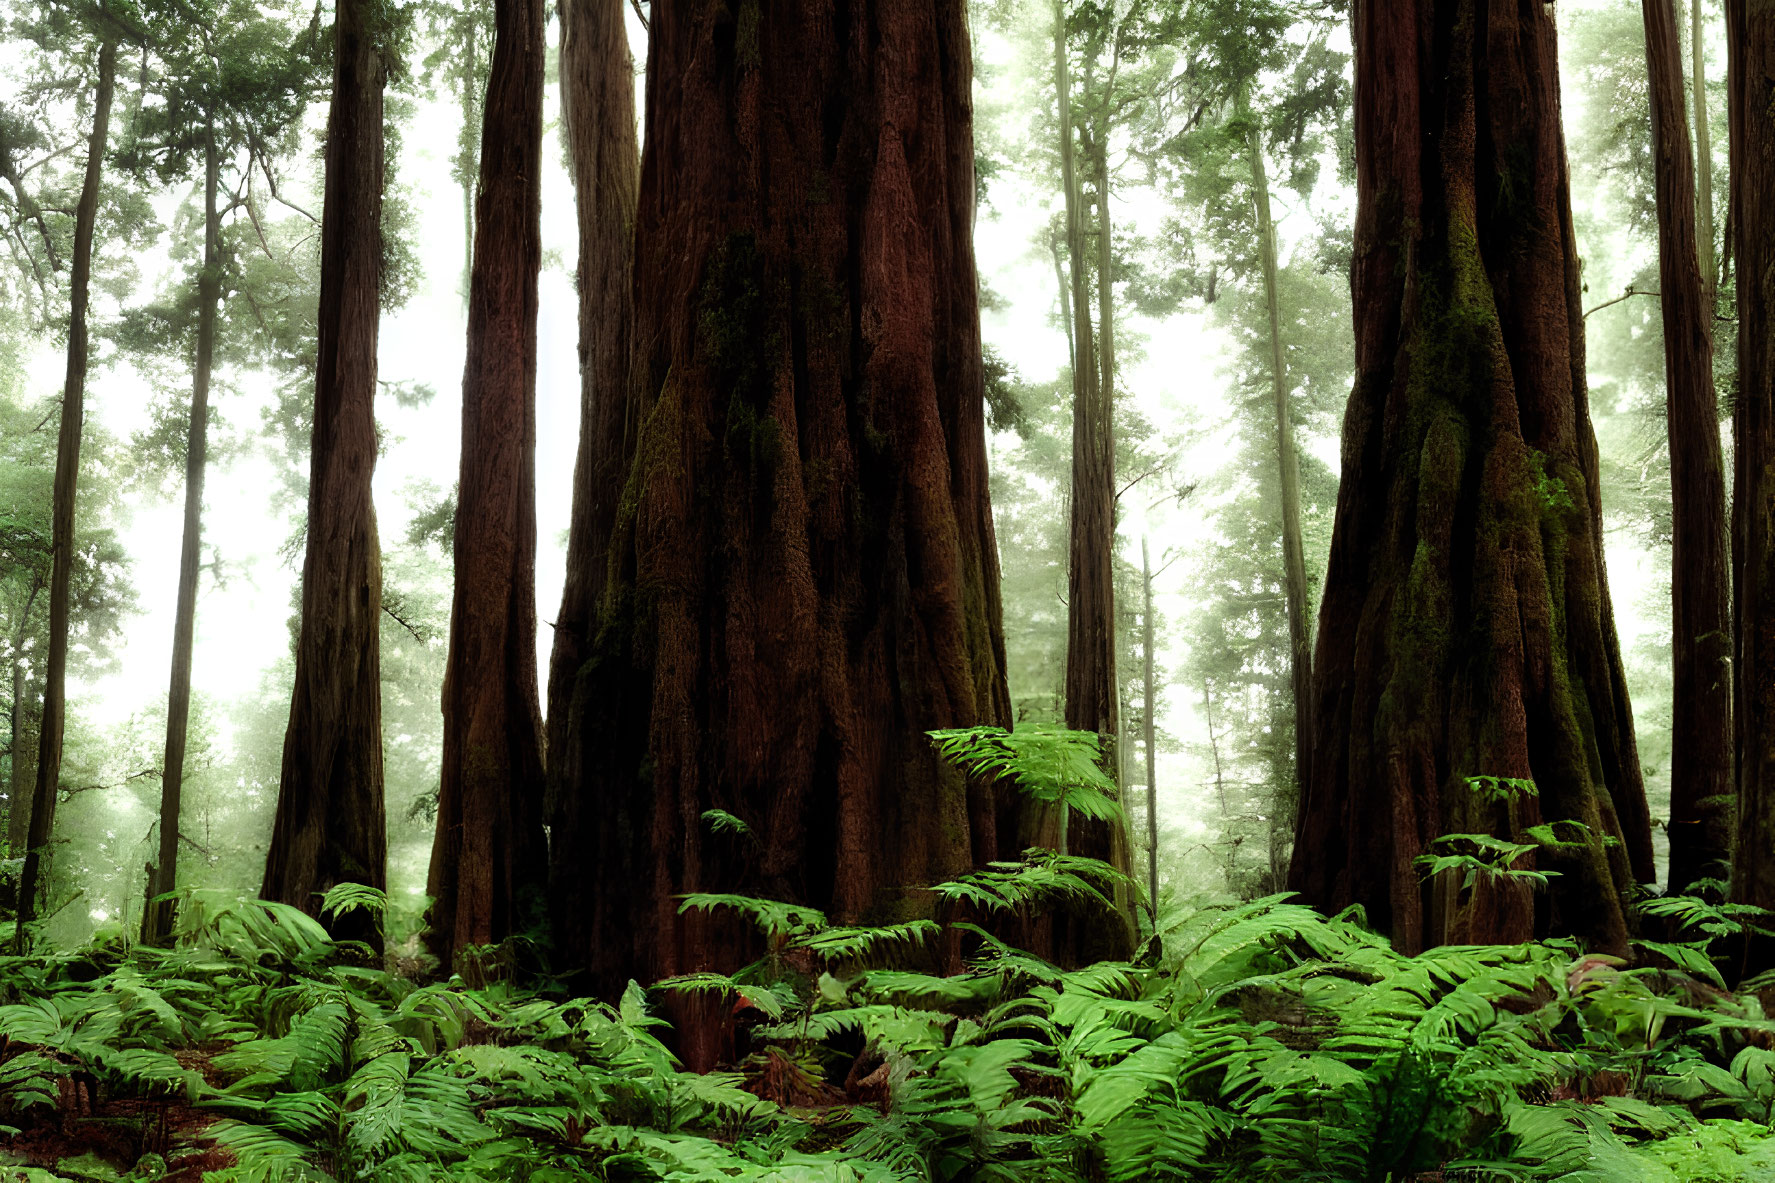 Towering Redwood Trees in Misty Forest Scene